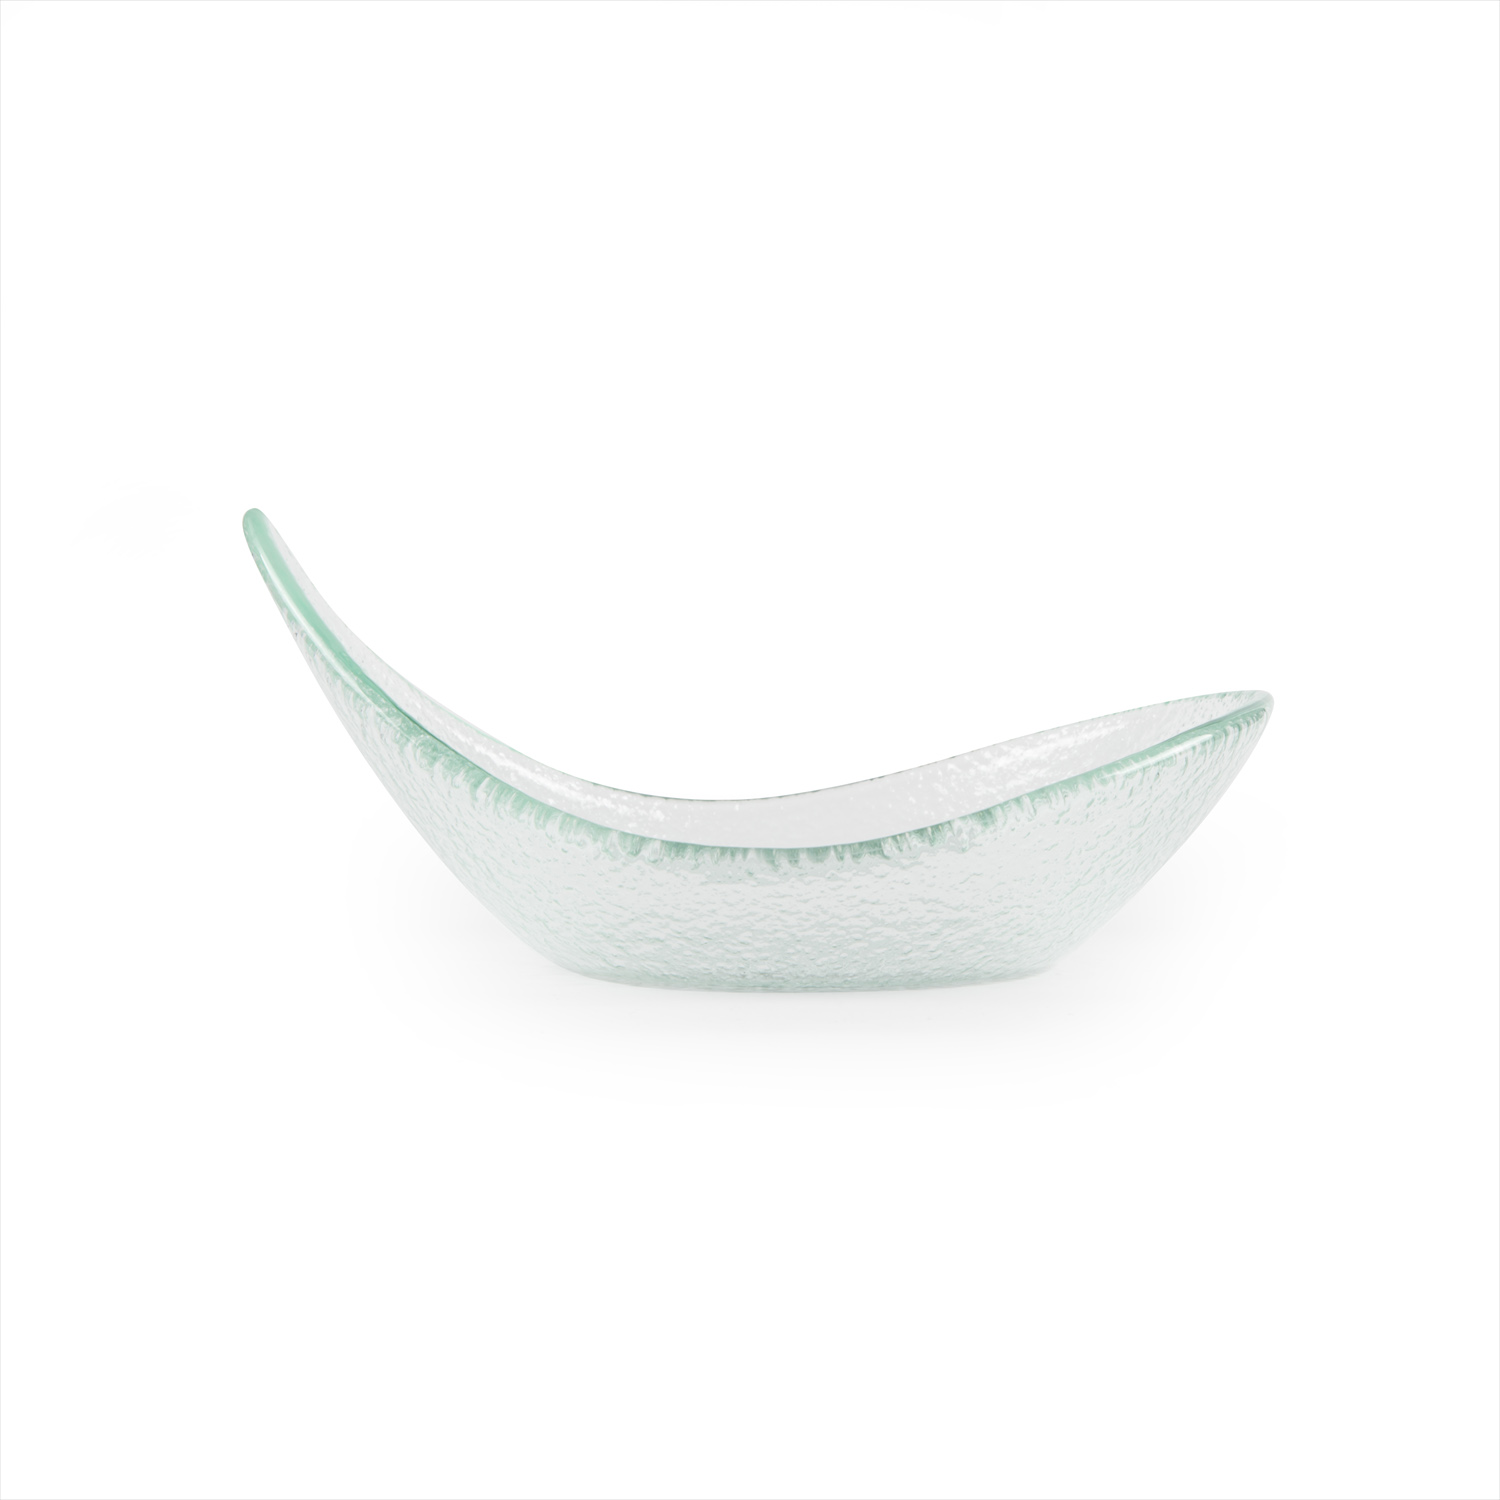 Fusion Glass Bowl Clear Oval 7.5″ x 5.75″ x 3.25″  10 oz. CasePack:6